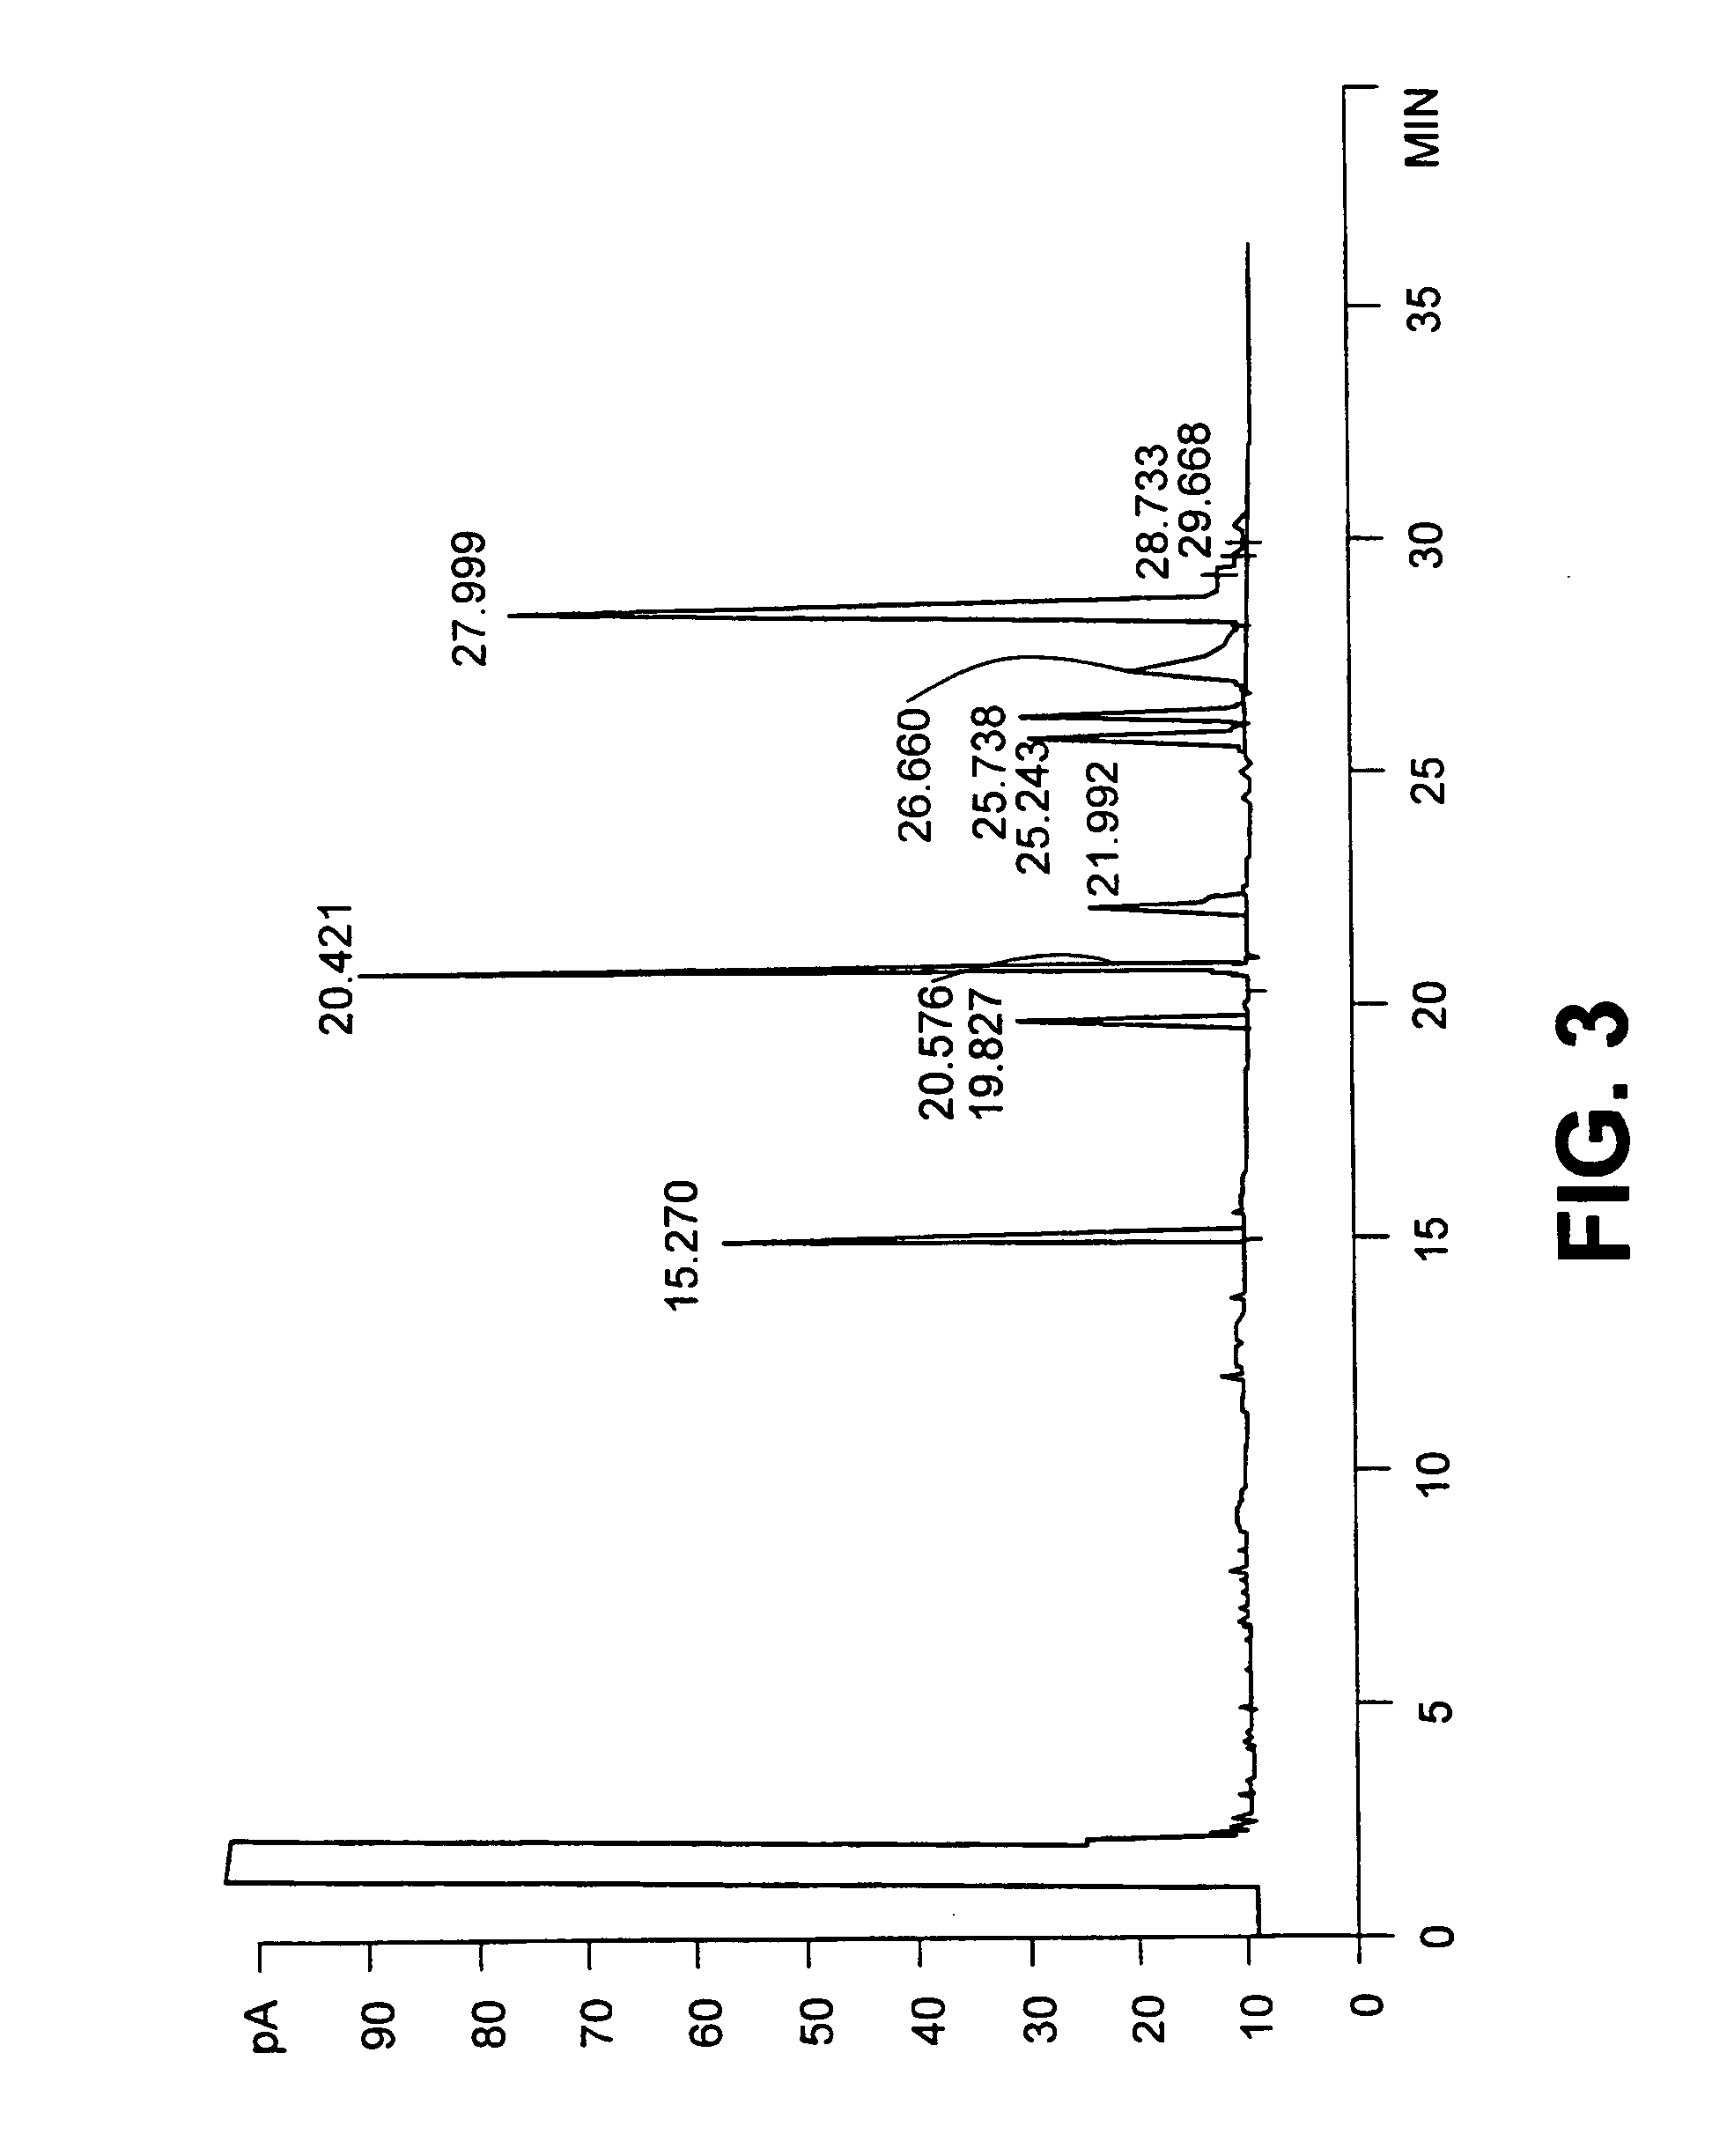 Method for commercial preparation of preffered isomeric forms of ester free conjugated fatty acids with solvents systems containing polyether alcohol solvents